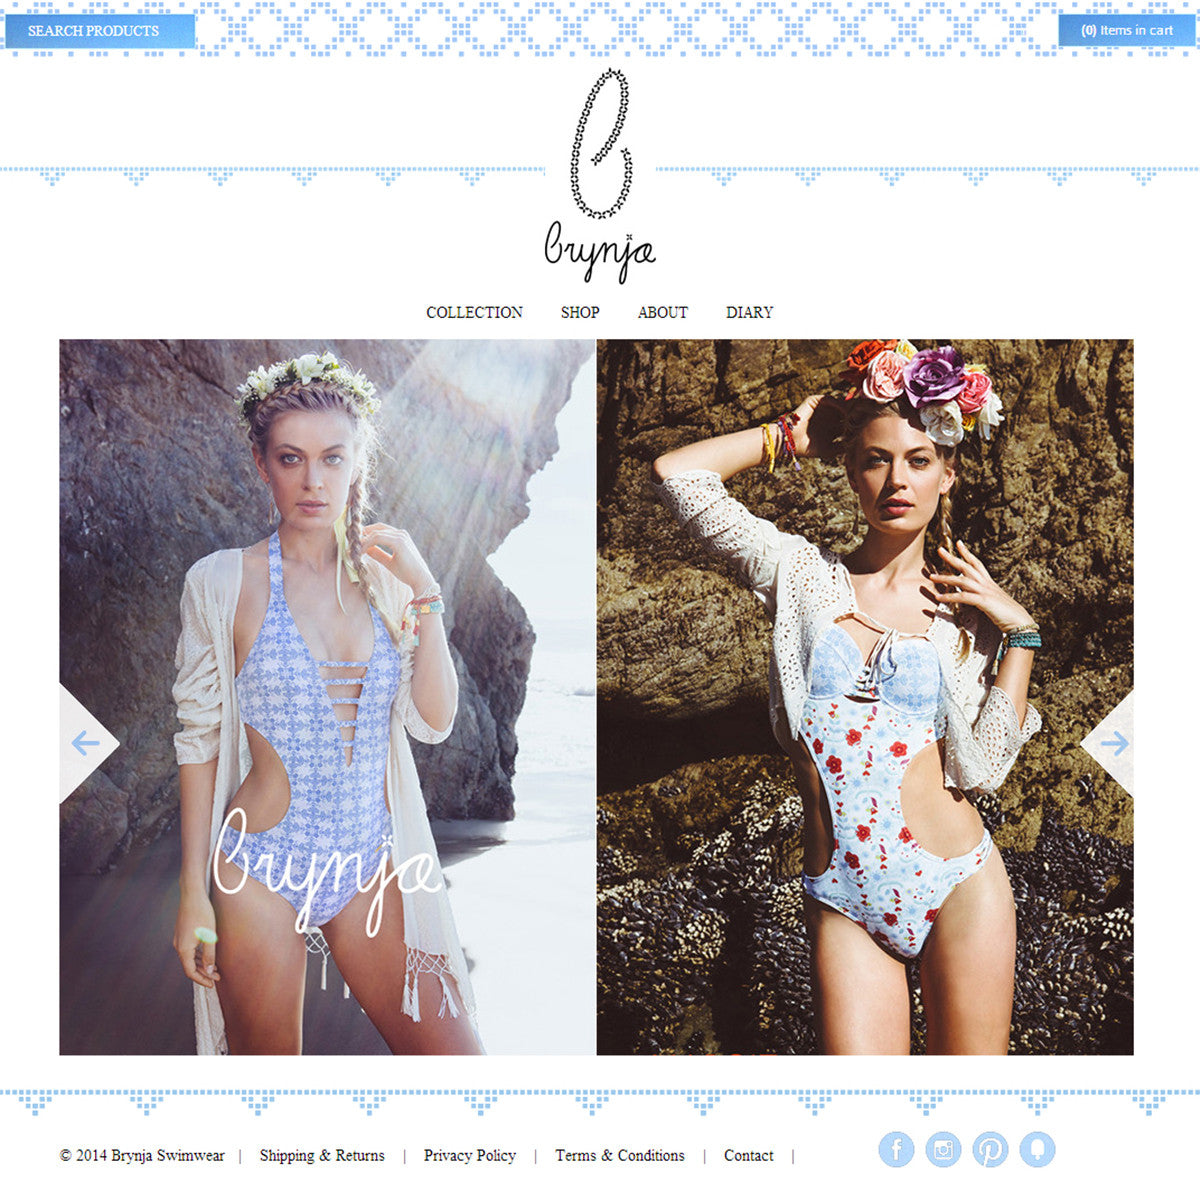 Brynja Swimwear - Photography and Web Design - Los Angeles, US based Shopify Experts Revo Designs